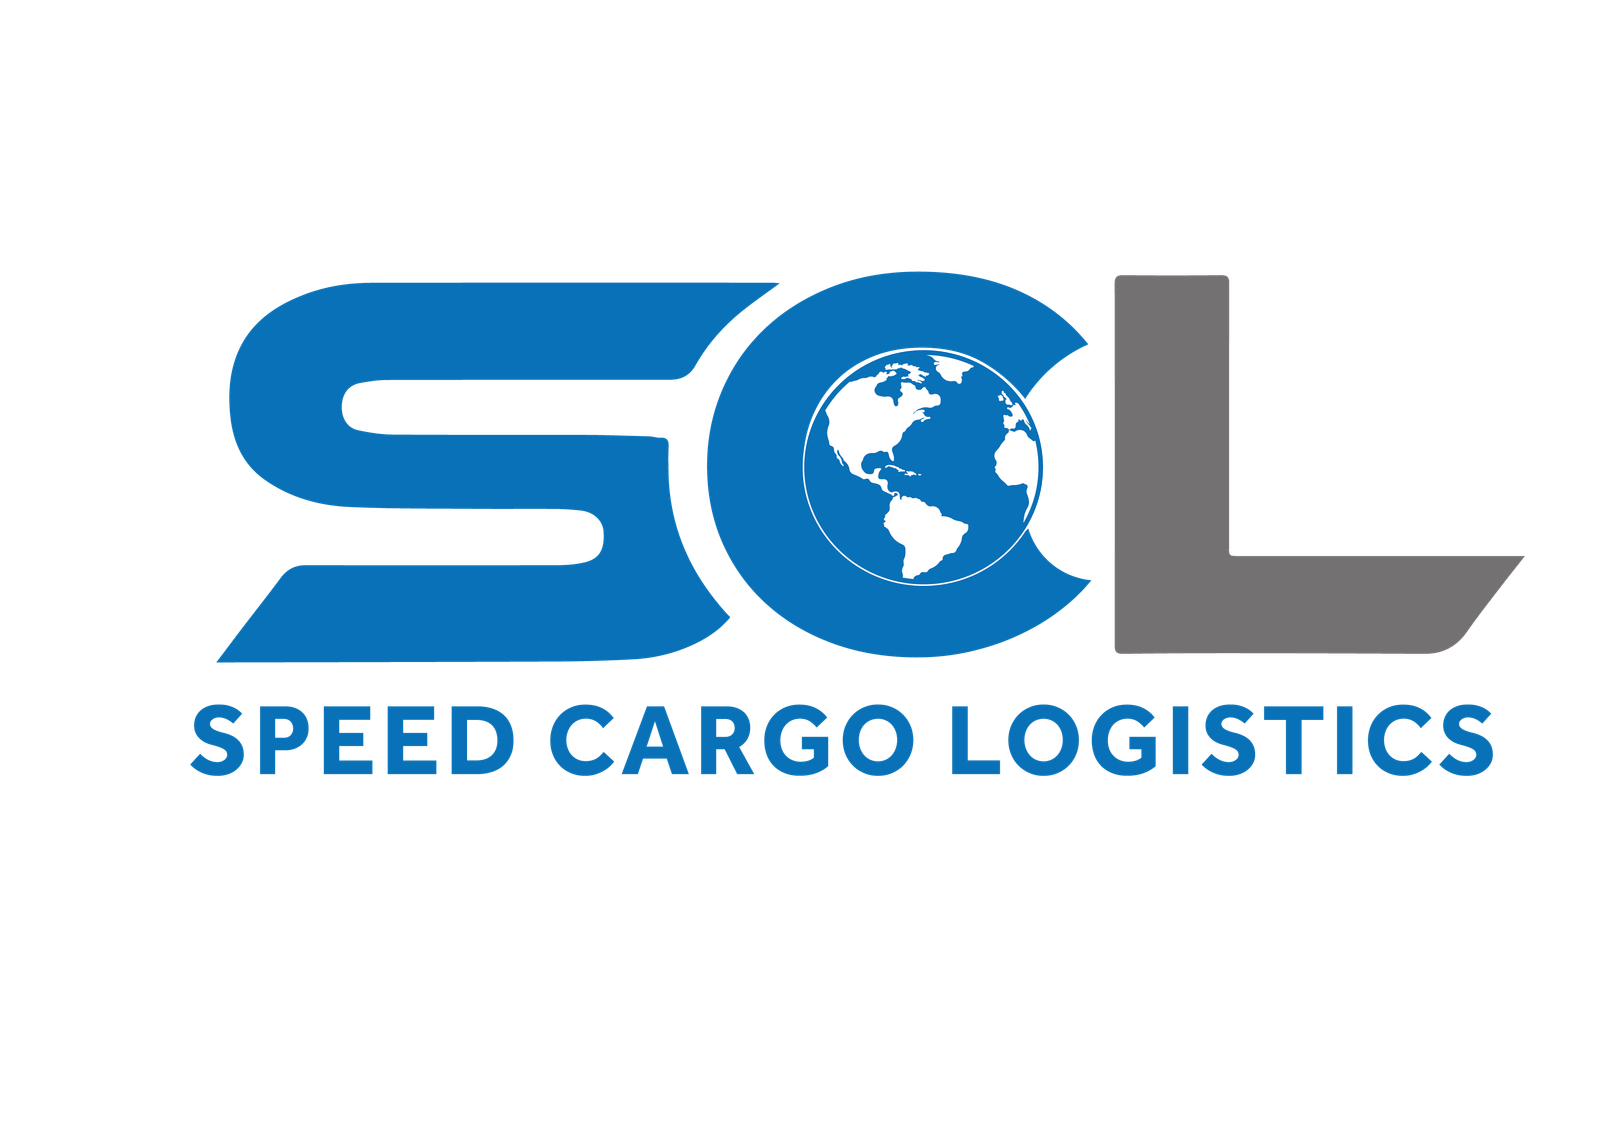 "Speed Cargo Lojestic Soars with MADAC: Marketing Excellence in Action